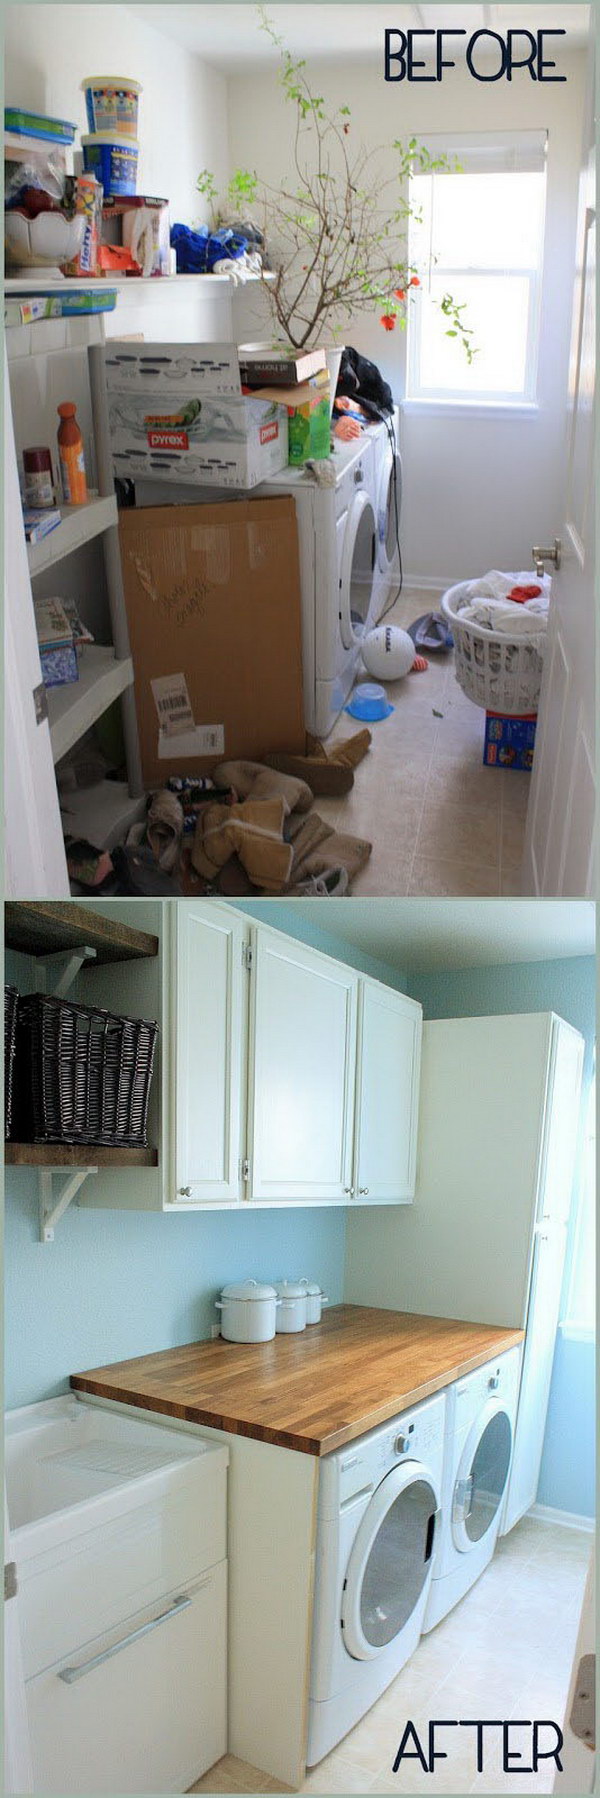 Form Mess To Neat Laundry Room Makeover. 